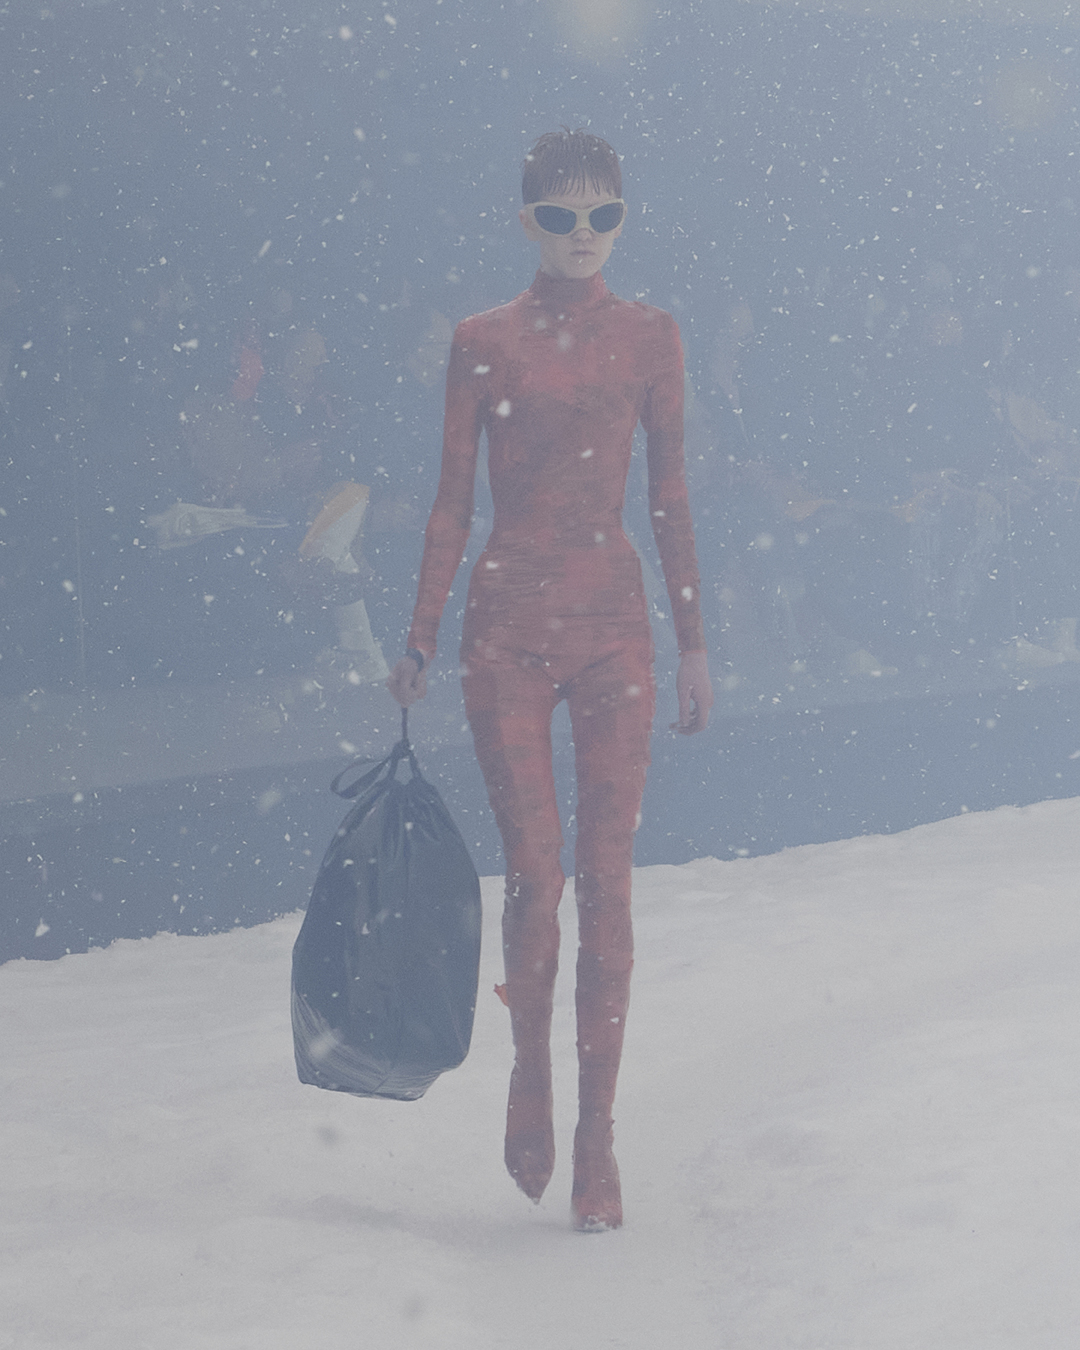 Balenciaga's Fall 2022 Took On Climate Change and the War in